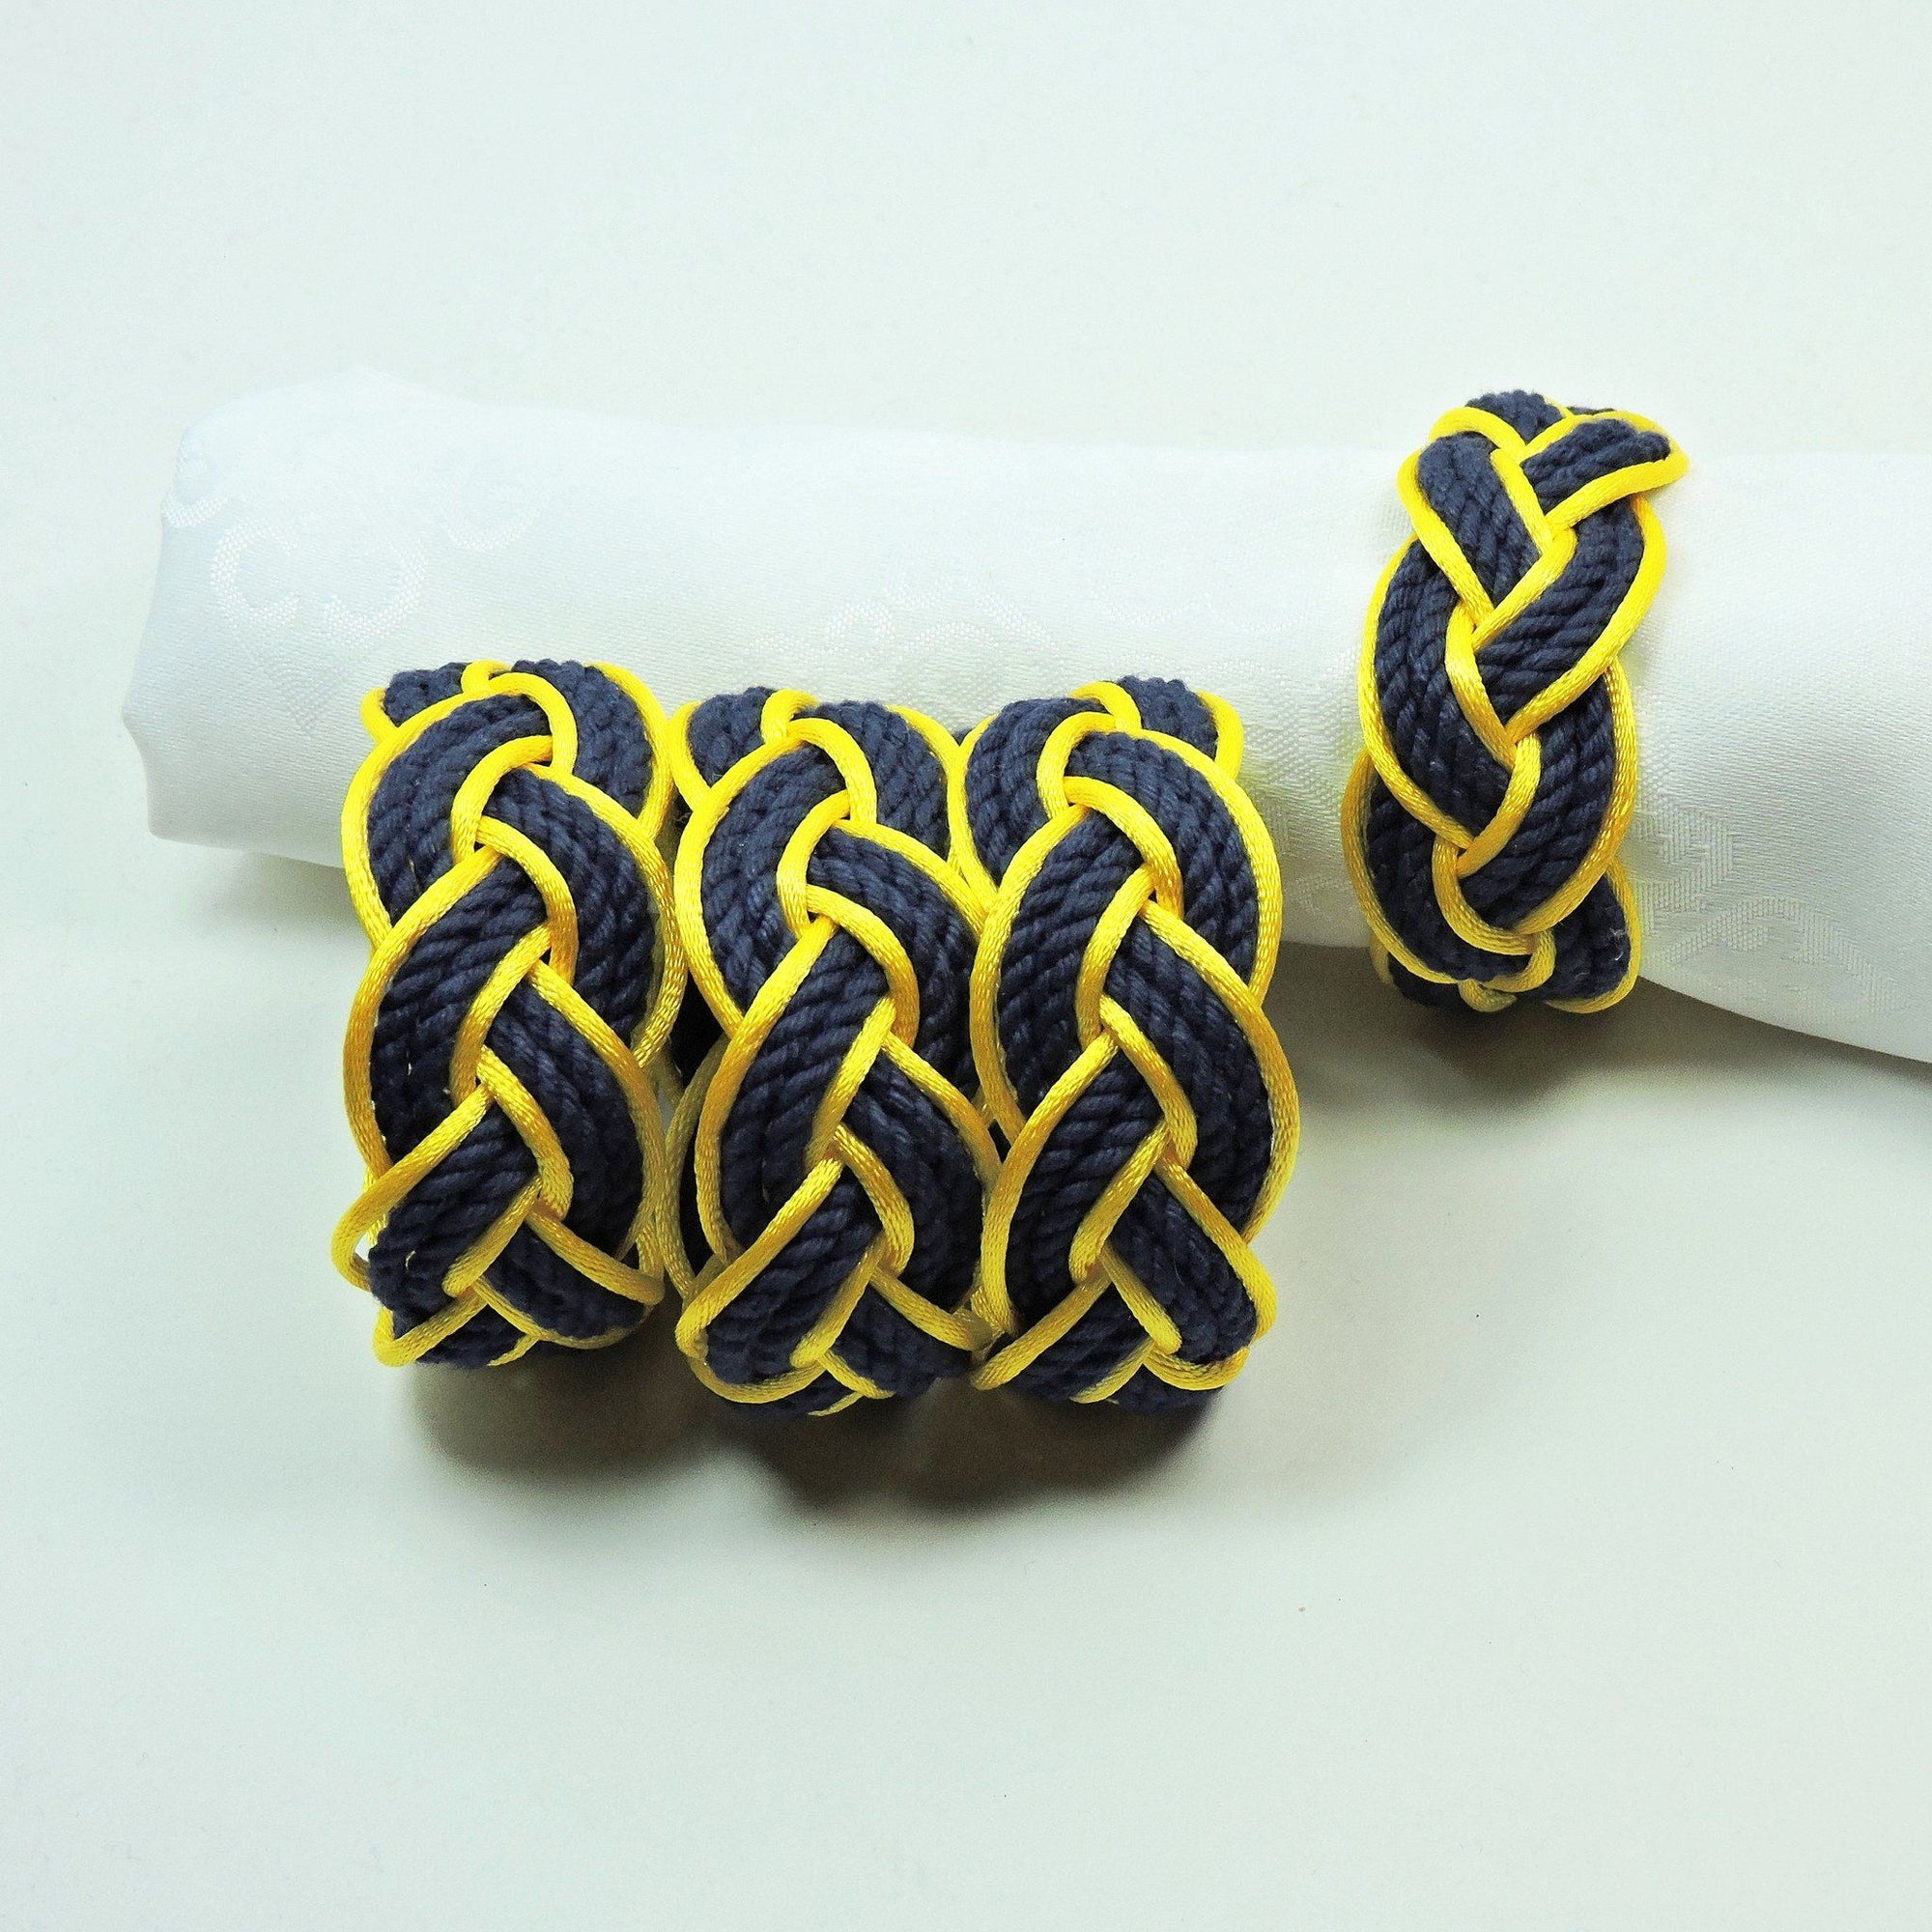 Nautical Knot Sailor Knot Napkin Rings, Navy Outlined in Yellow Satin, Set of 4 - Limited Edition! handmade at Mystic Knotwork